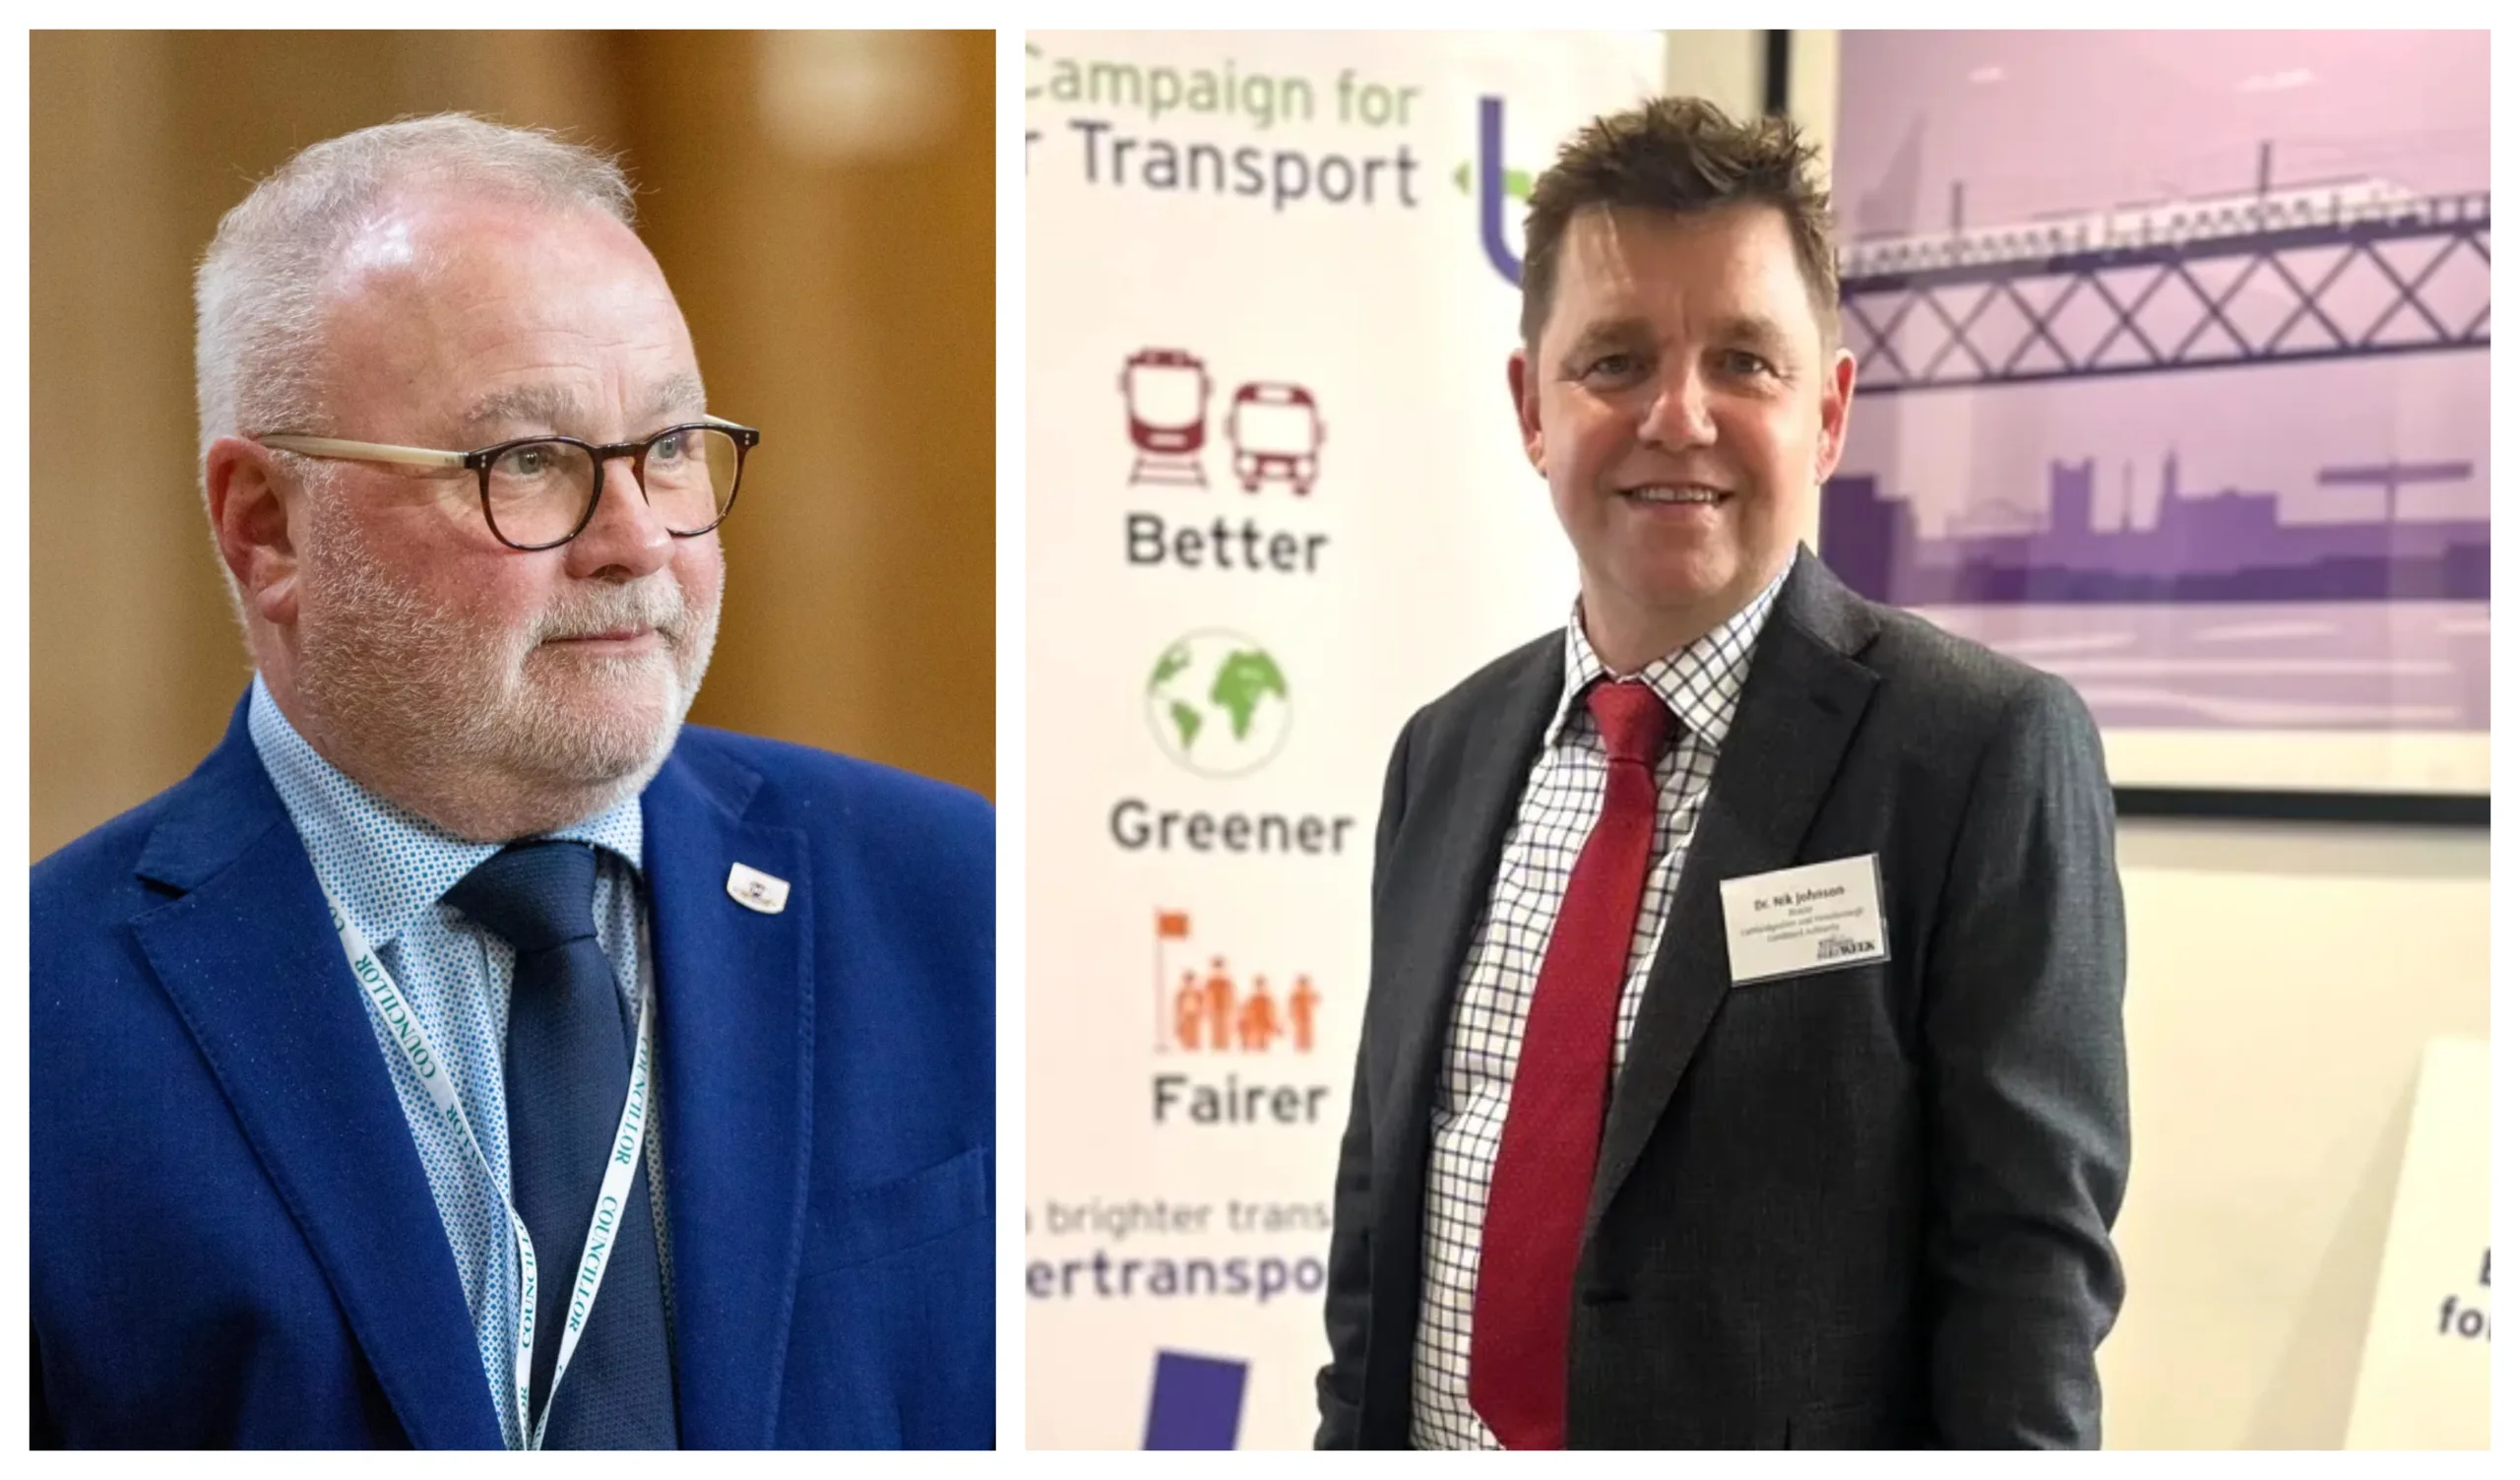 Mayor Dr Nik Johnson under fire from Cllr Wayne Fitzgerald (right) who says: “In essence, the findings against the mayor show that a supposedly senior professional, a children’s doctor no less, was totally unequipped then, and remains so now, to fulfil the role of mayor.”